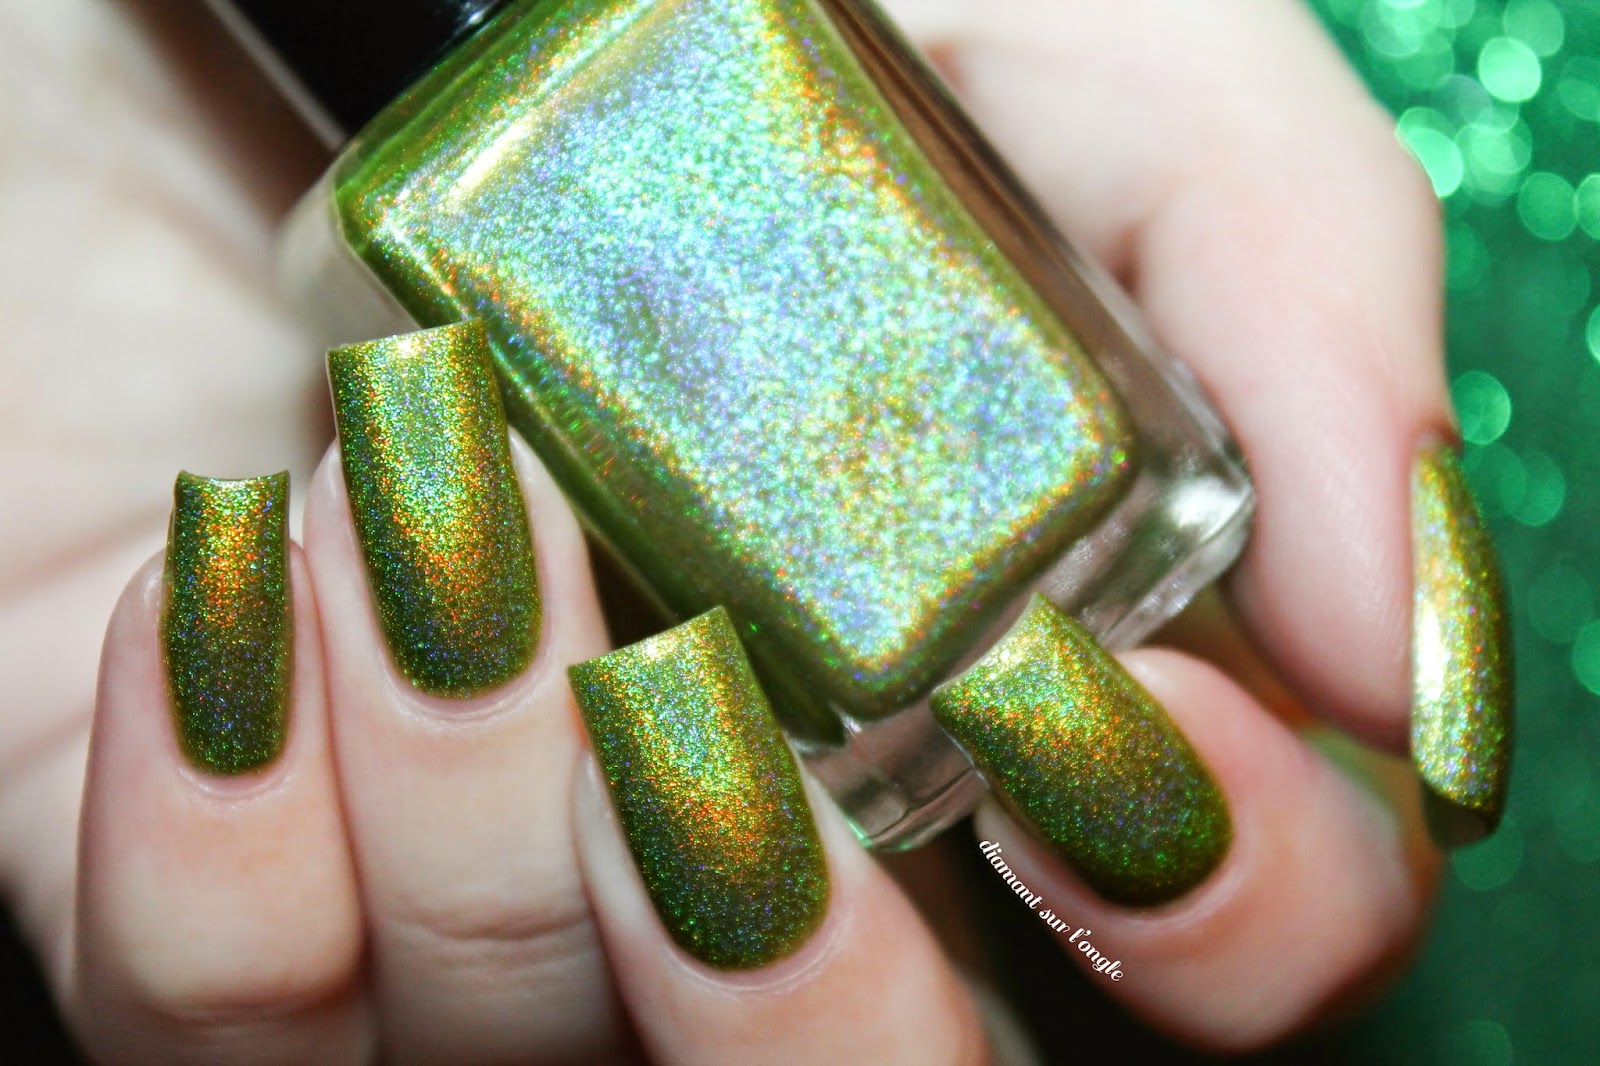 Swatch of March 2014 by Enchanted Polish